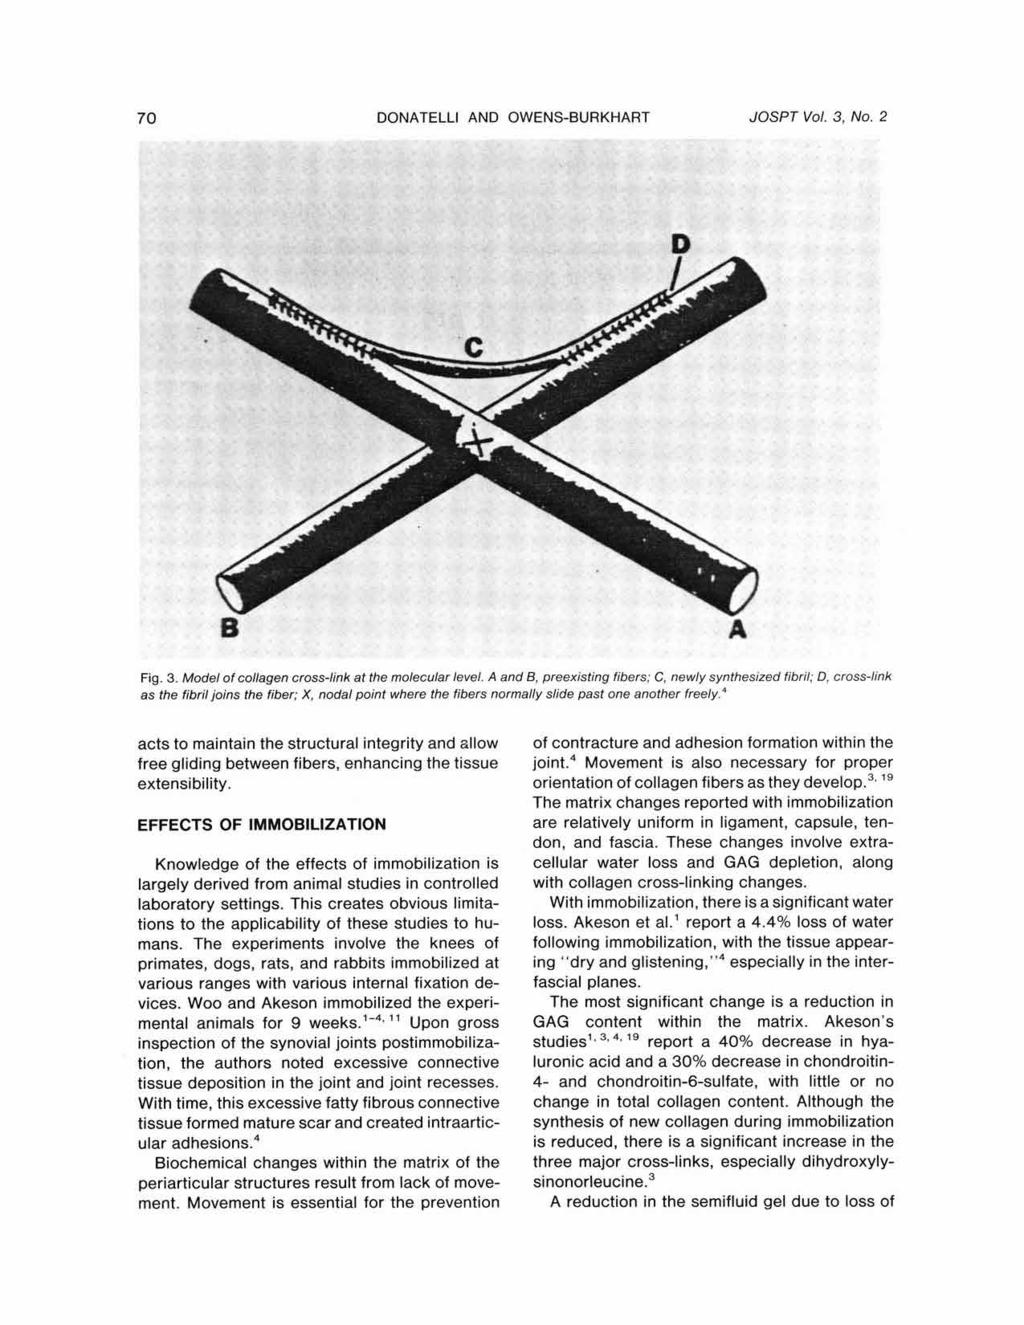 70 DONATELLI AND OWENS-BURKHART JOSPT Vol. 3, No. 2 Copyright 1981. All rights reserved. Fig. 3. Model of collagen cross-link at the molecular level.